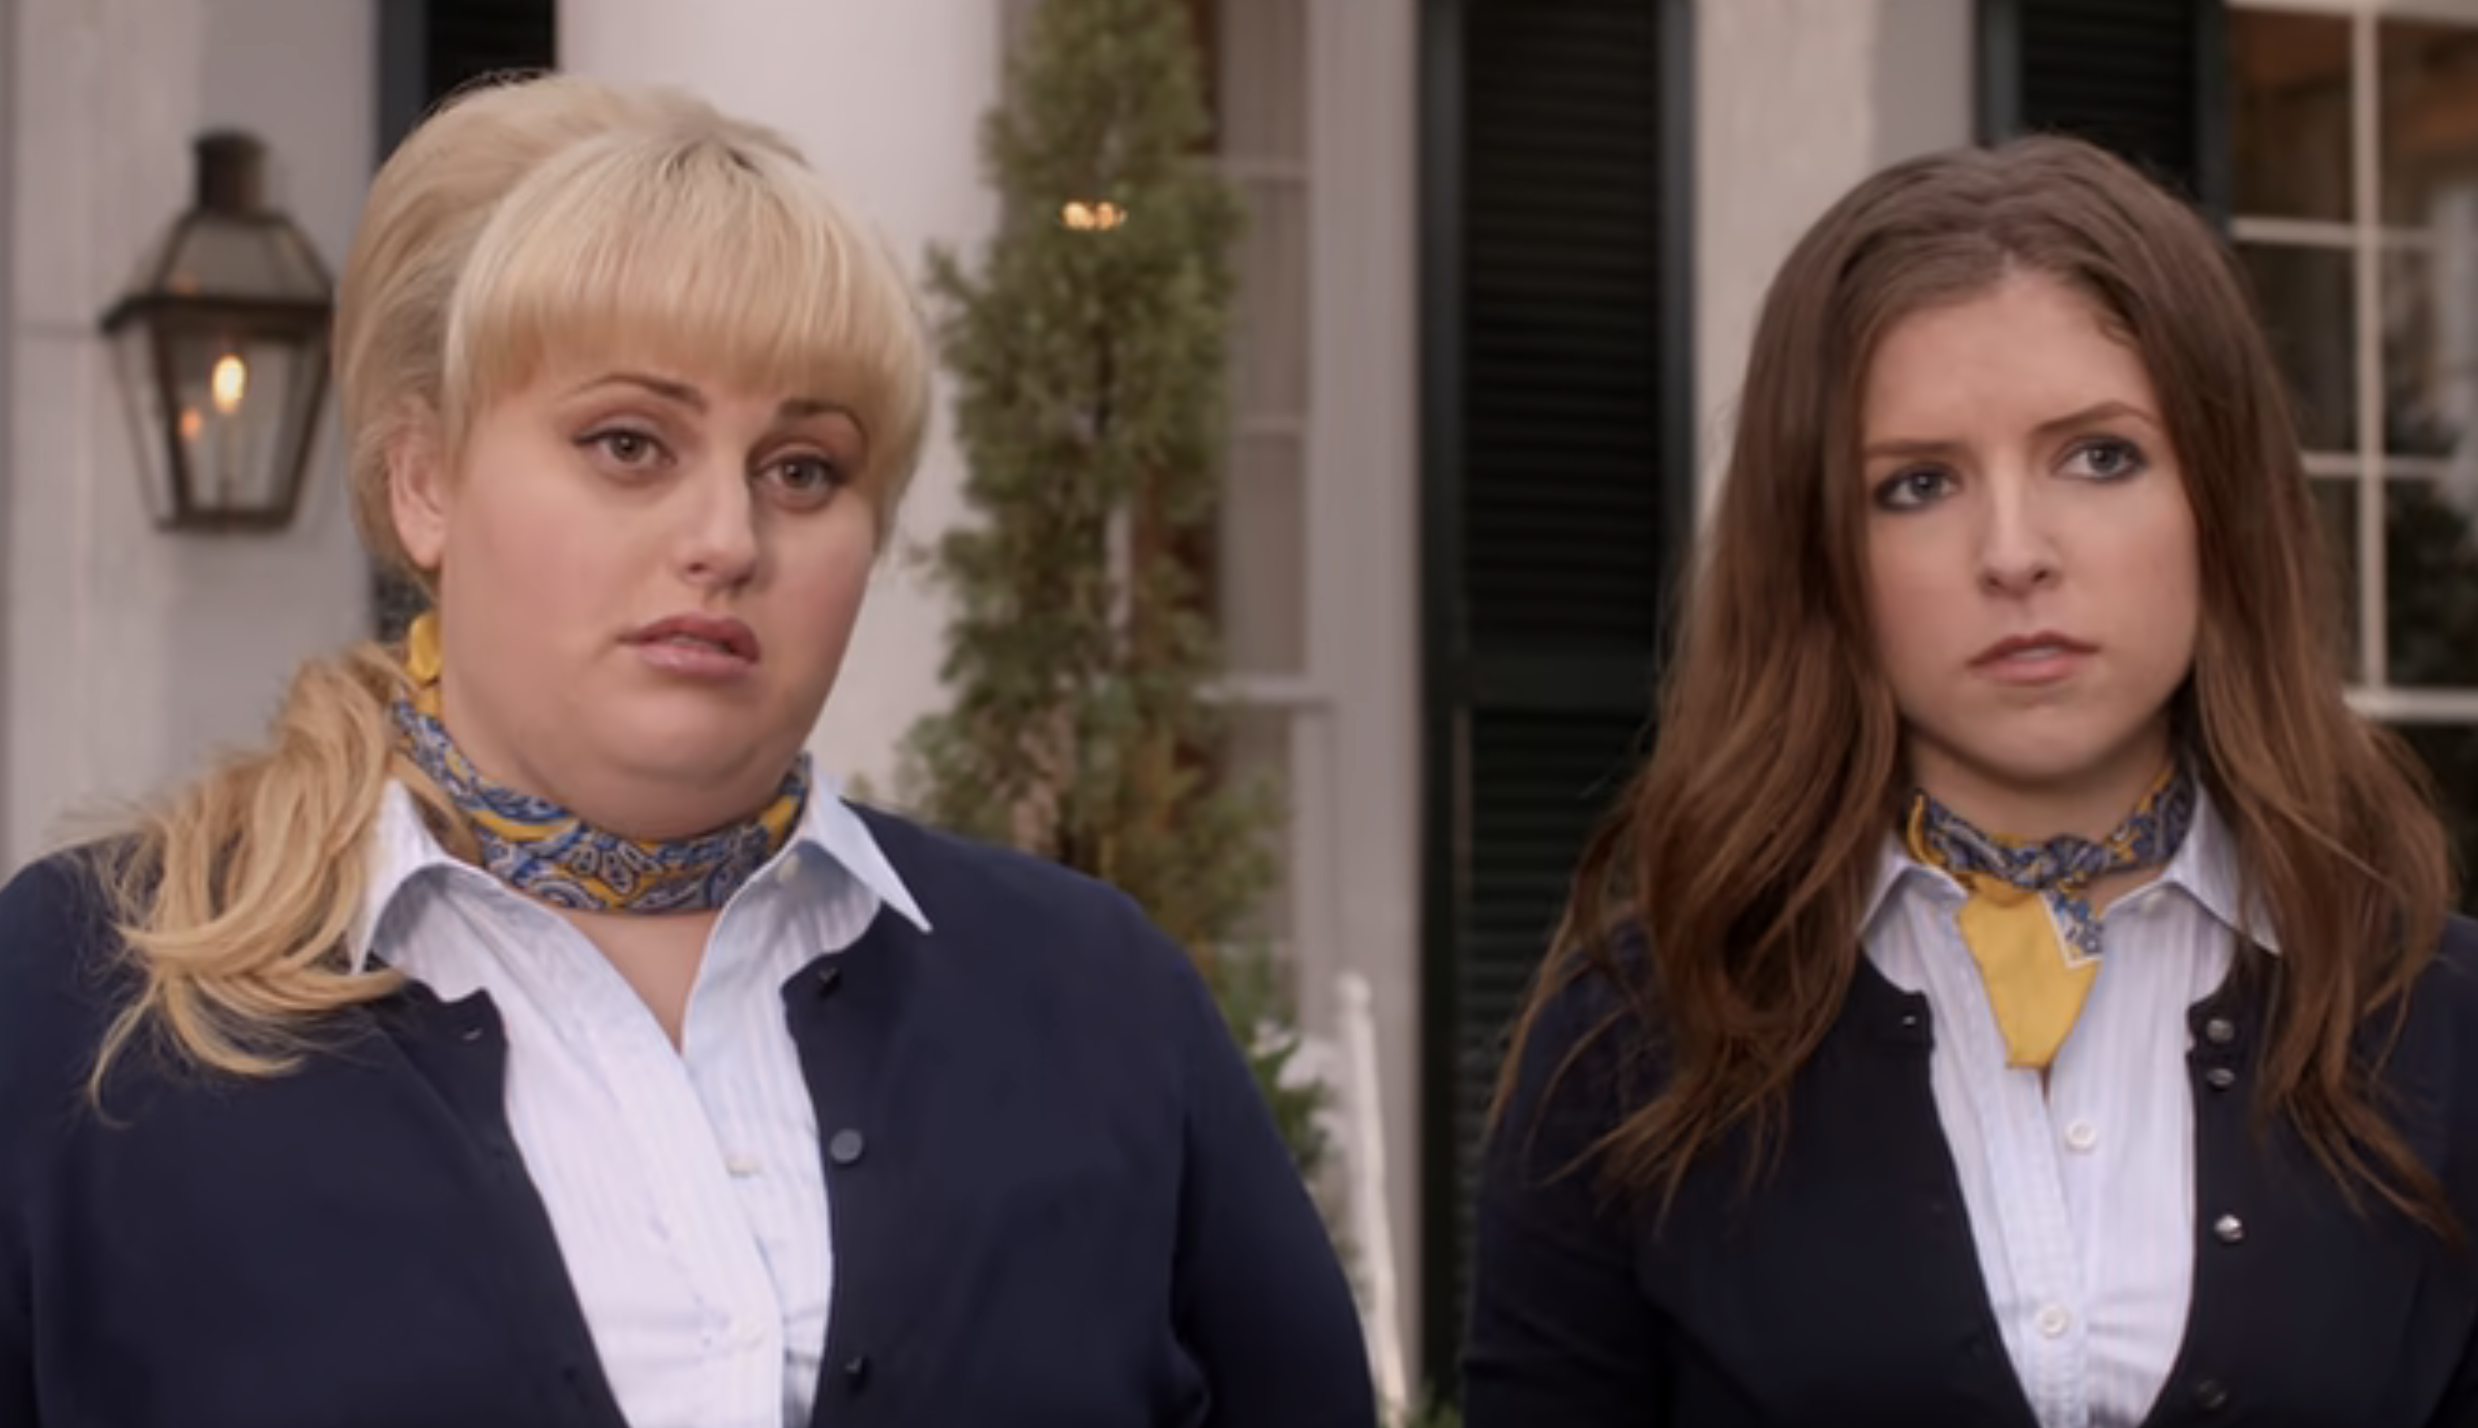 Fat Amy and Beca, played by Anna Kendrick, stand side by side in their matching uniforms, looking serious